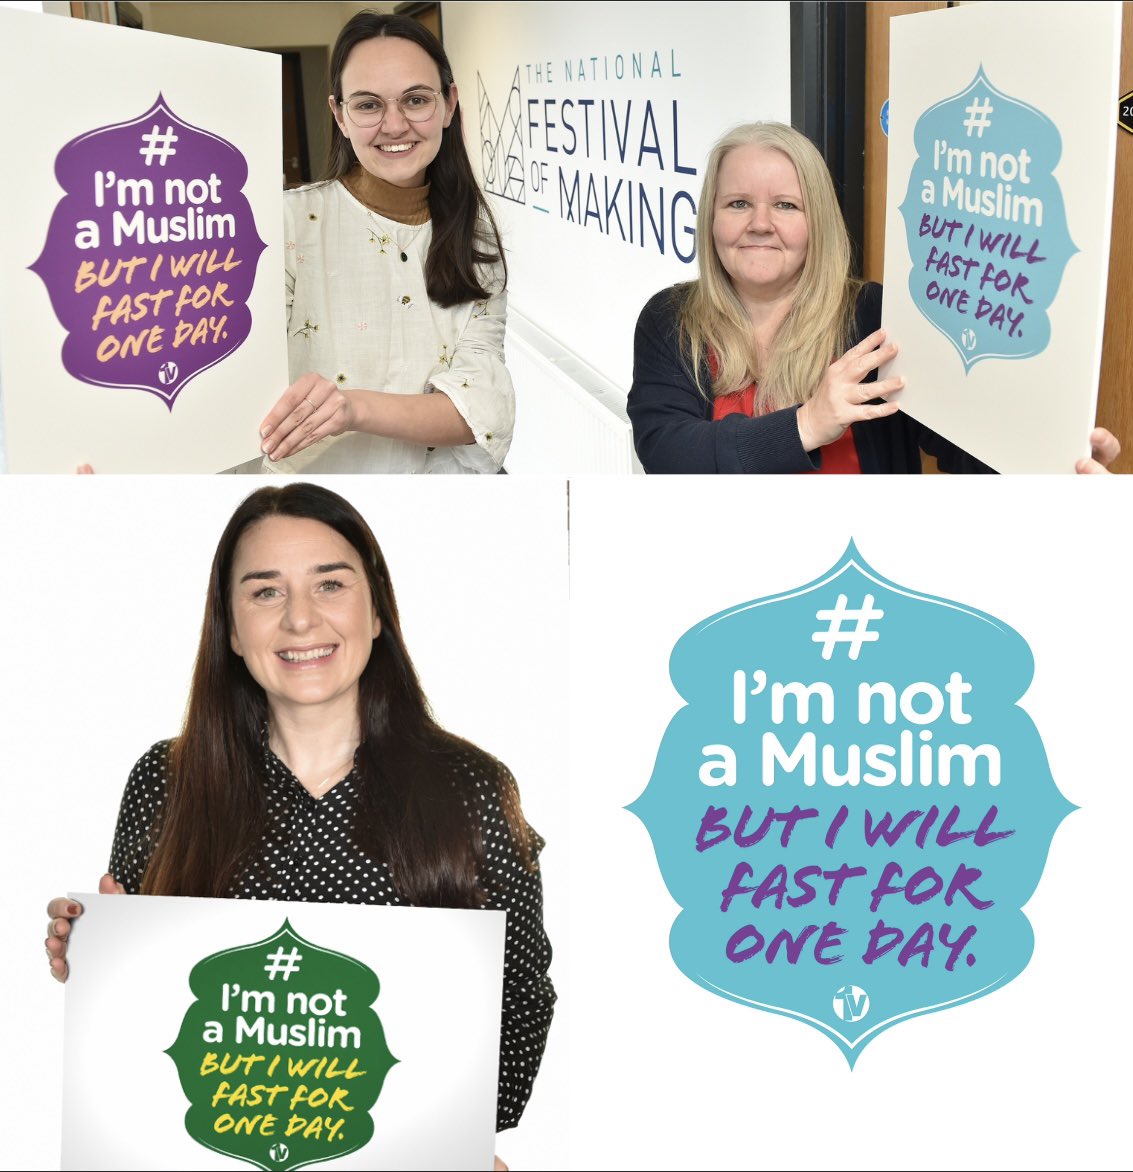 Lauren Zawadzki, Daisy Williamson and Sue Blackburn @festofmaking have taken part in our #imnotamuslimbutiwillfastforoneday campaign. 
Lauren Zawadzki - Director Festival of Making states “I joined this campaign because I am a firm believer in the power of unity and empathy. “